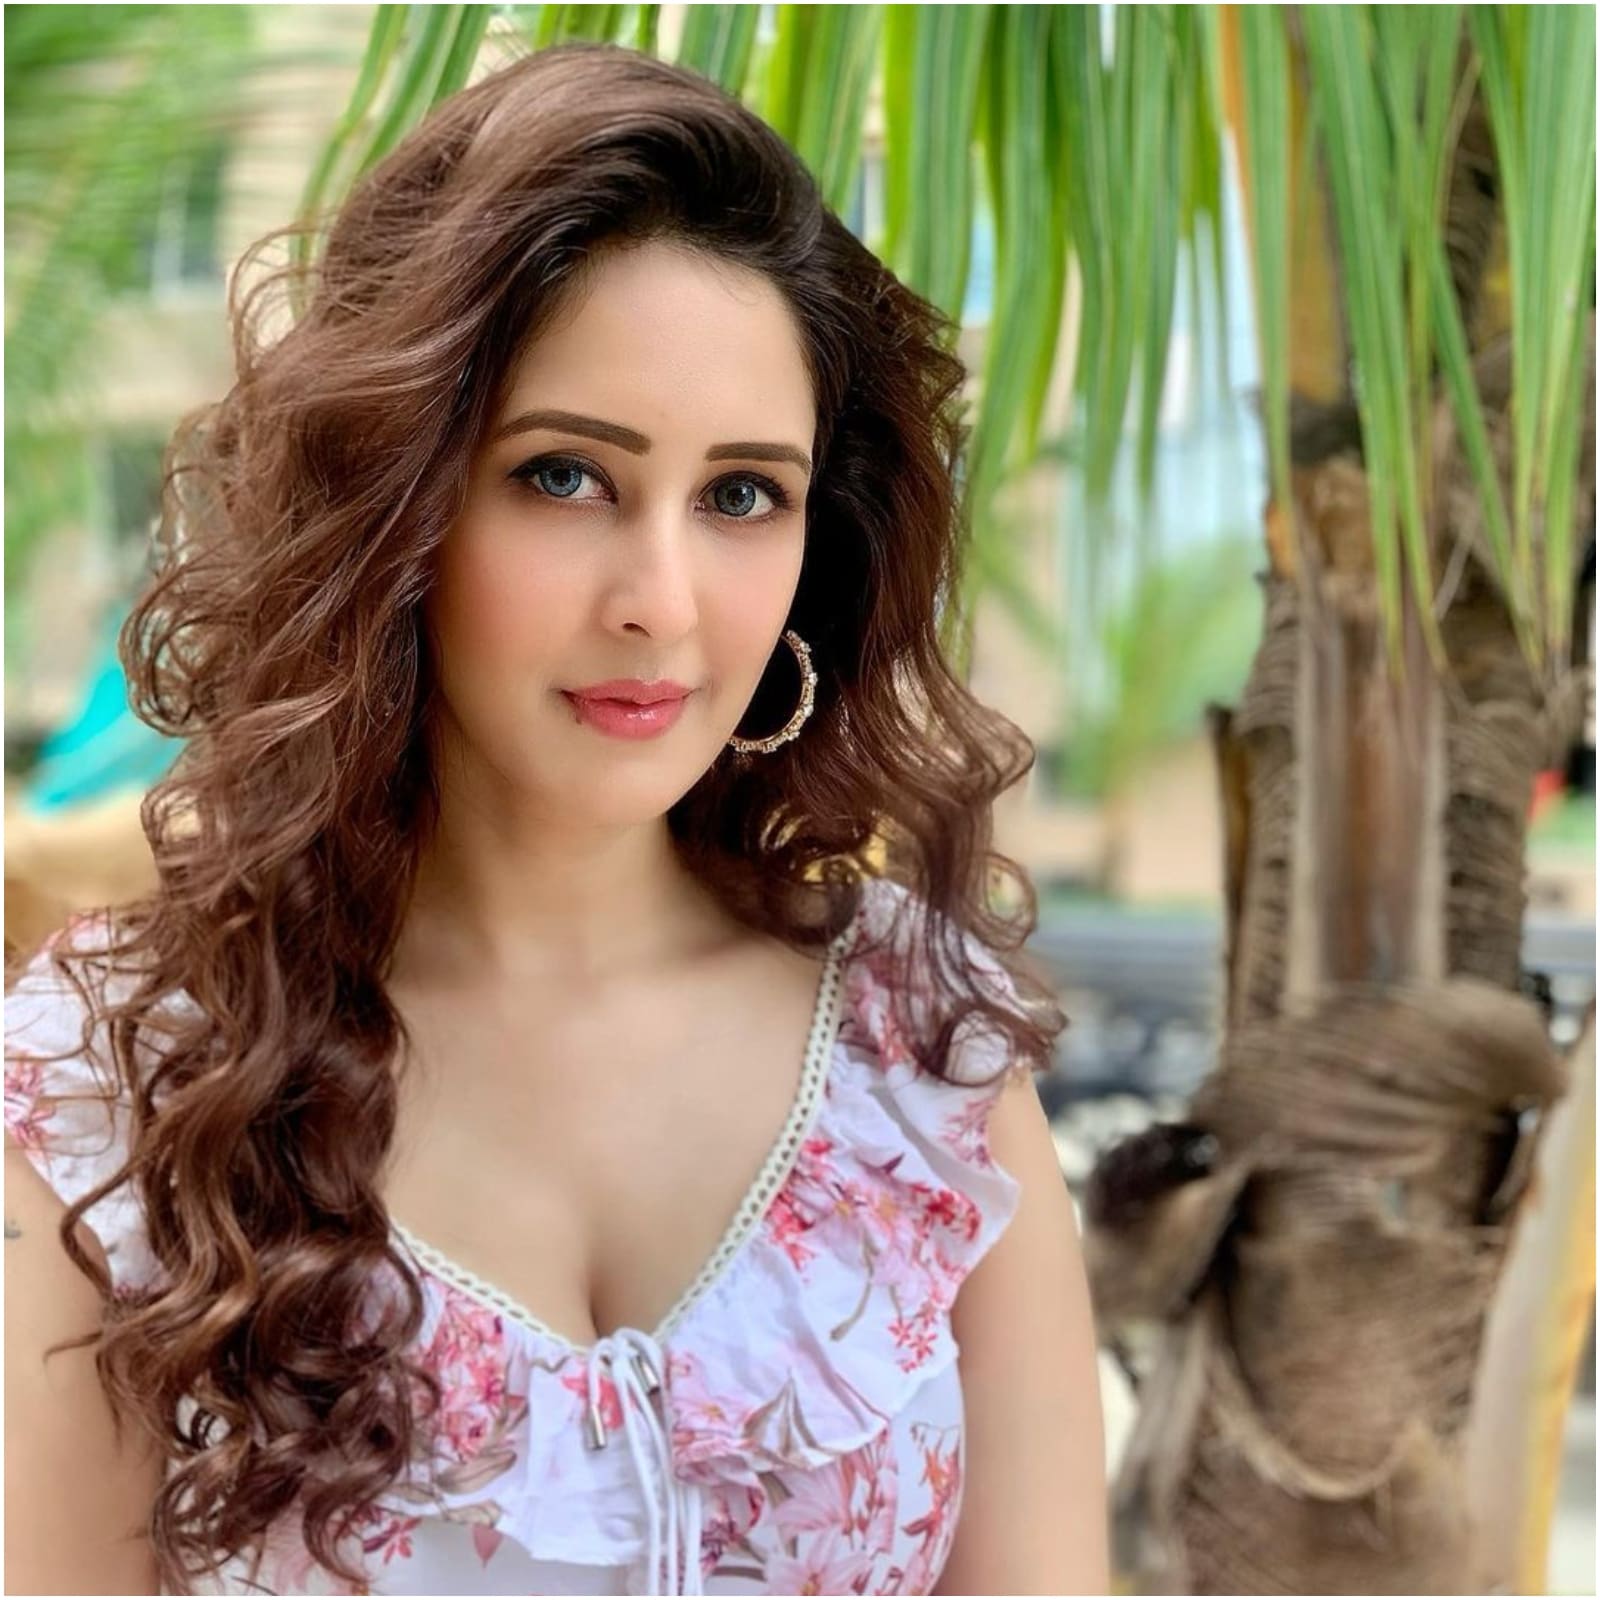 Chahat Khanna Desi Xxx Hd - Bade Achhe Lagte Hain Actor Chahat Khanna's Husband Gets Protection from  Arrest in Rape Allegations - News18